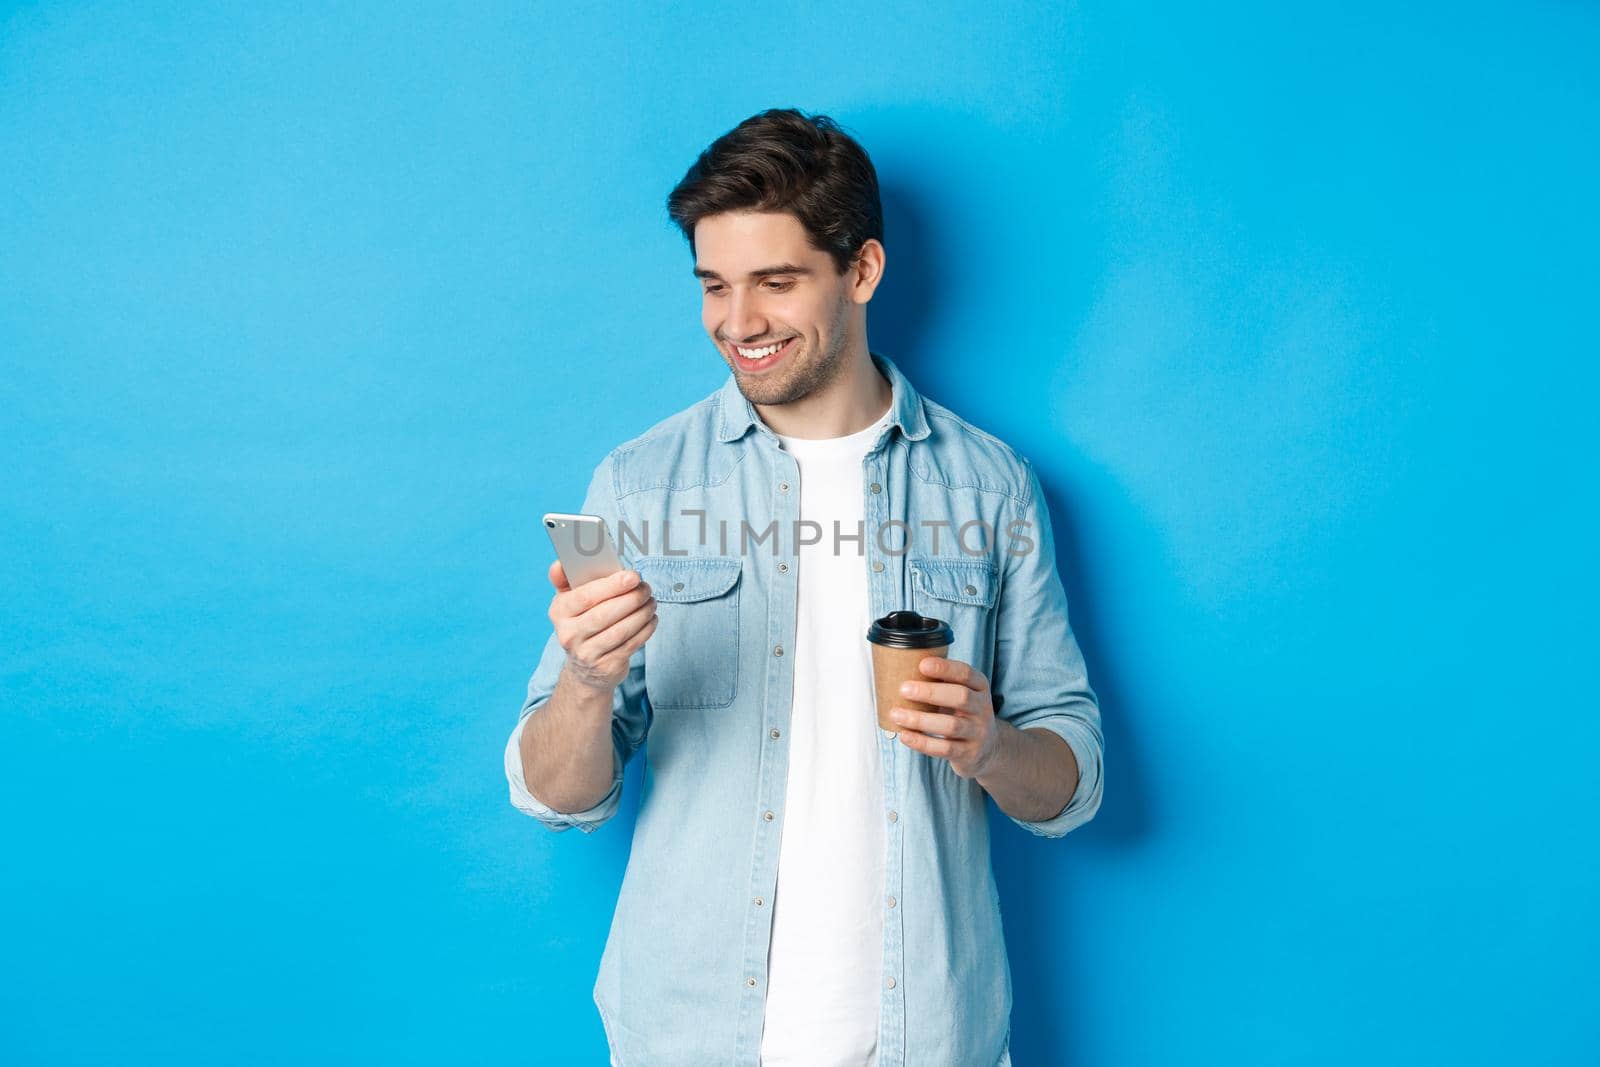 Handsome modern guy reading message on cell phone and drinking coffee, standing against blue background.